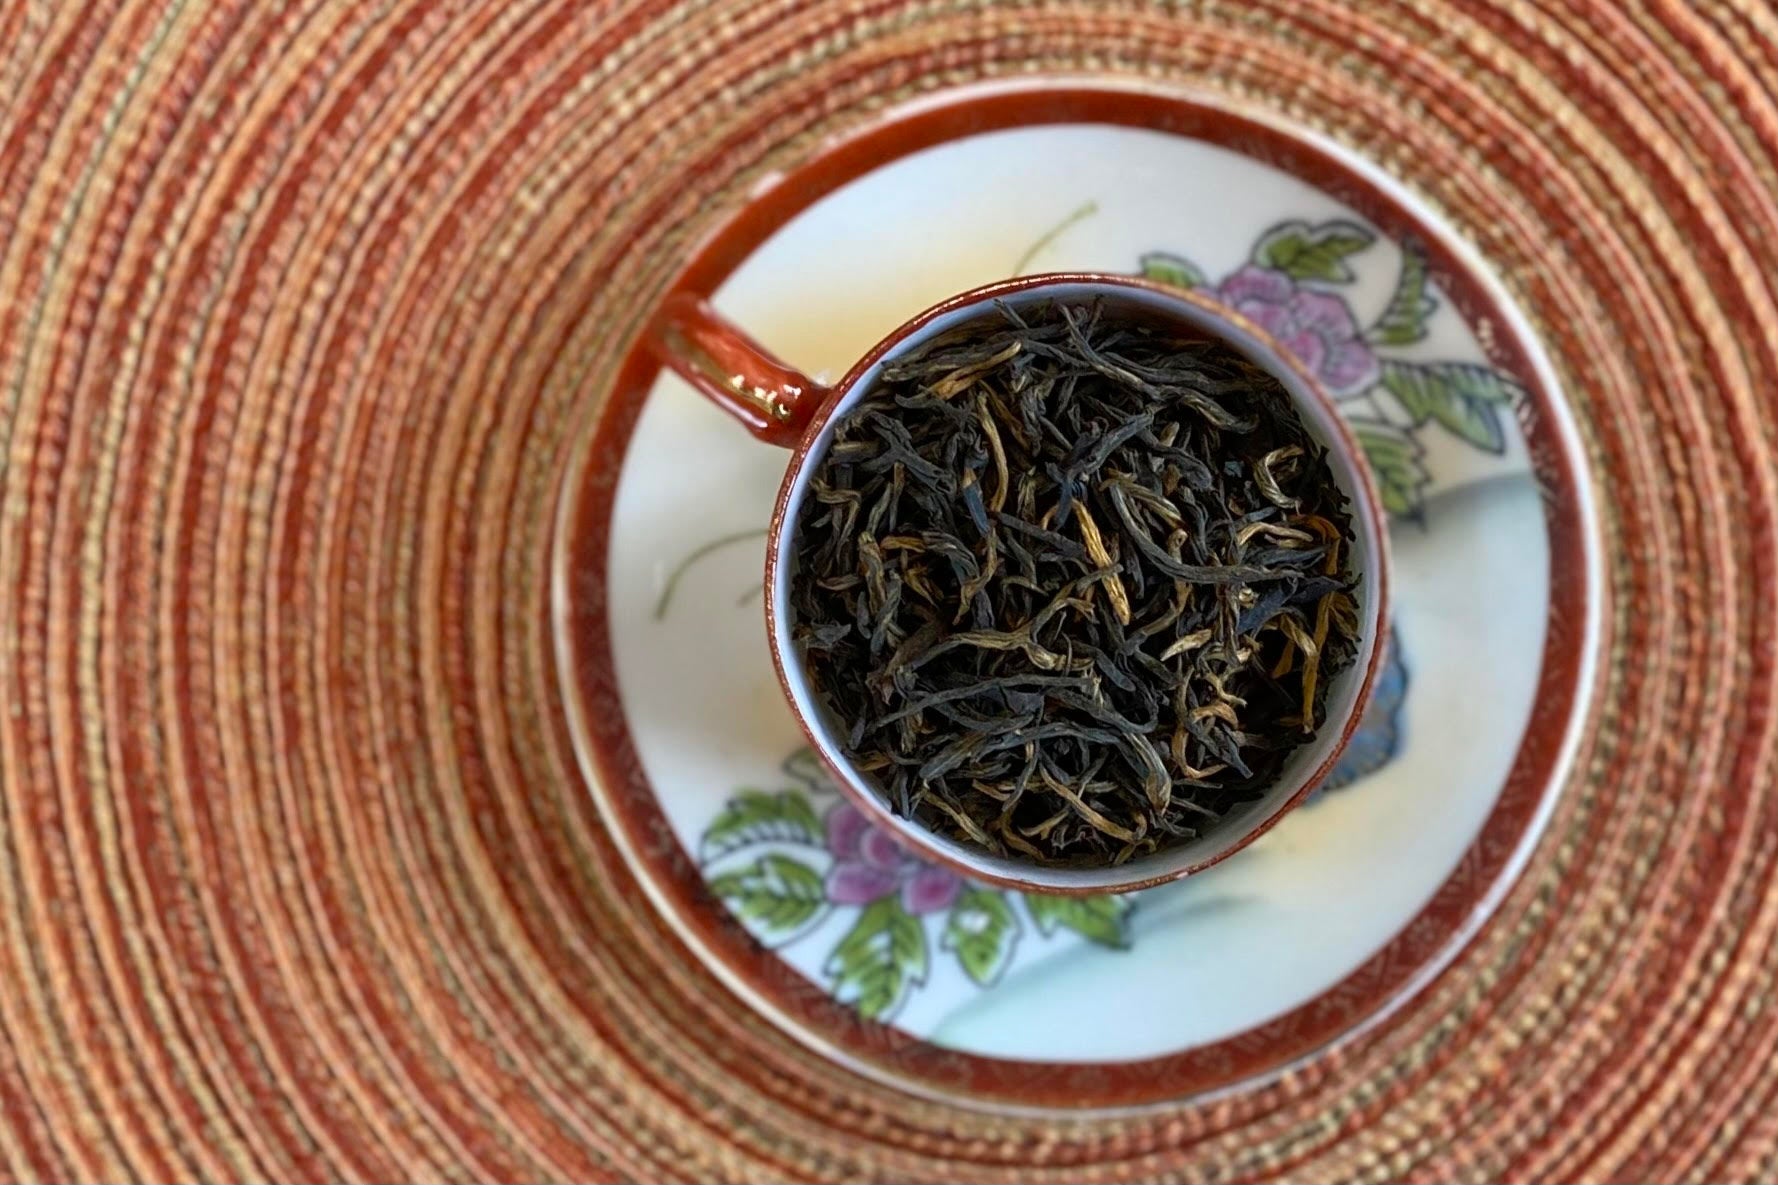 teacup full of black tea with gold tips